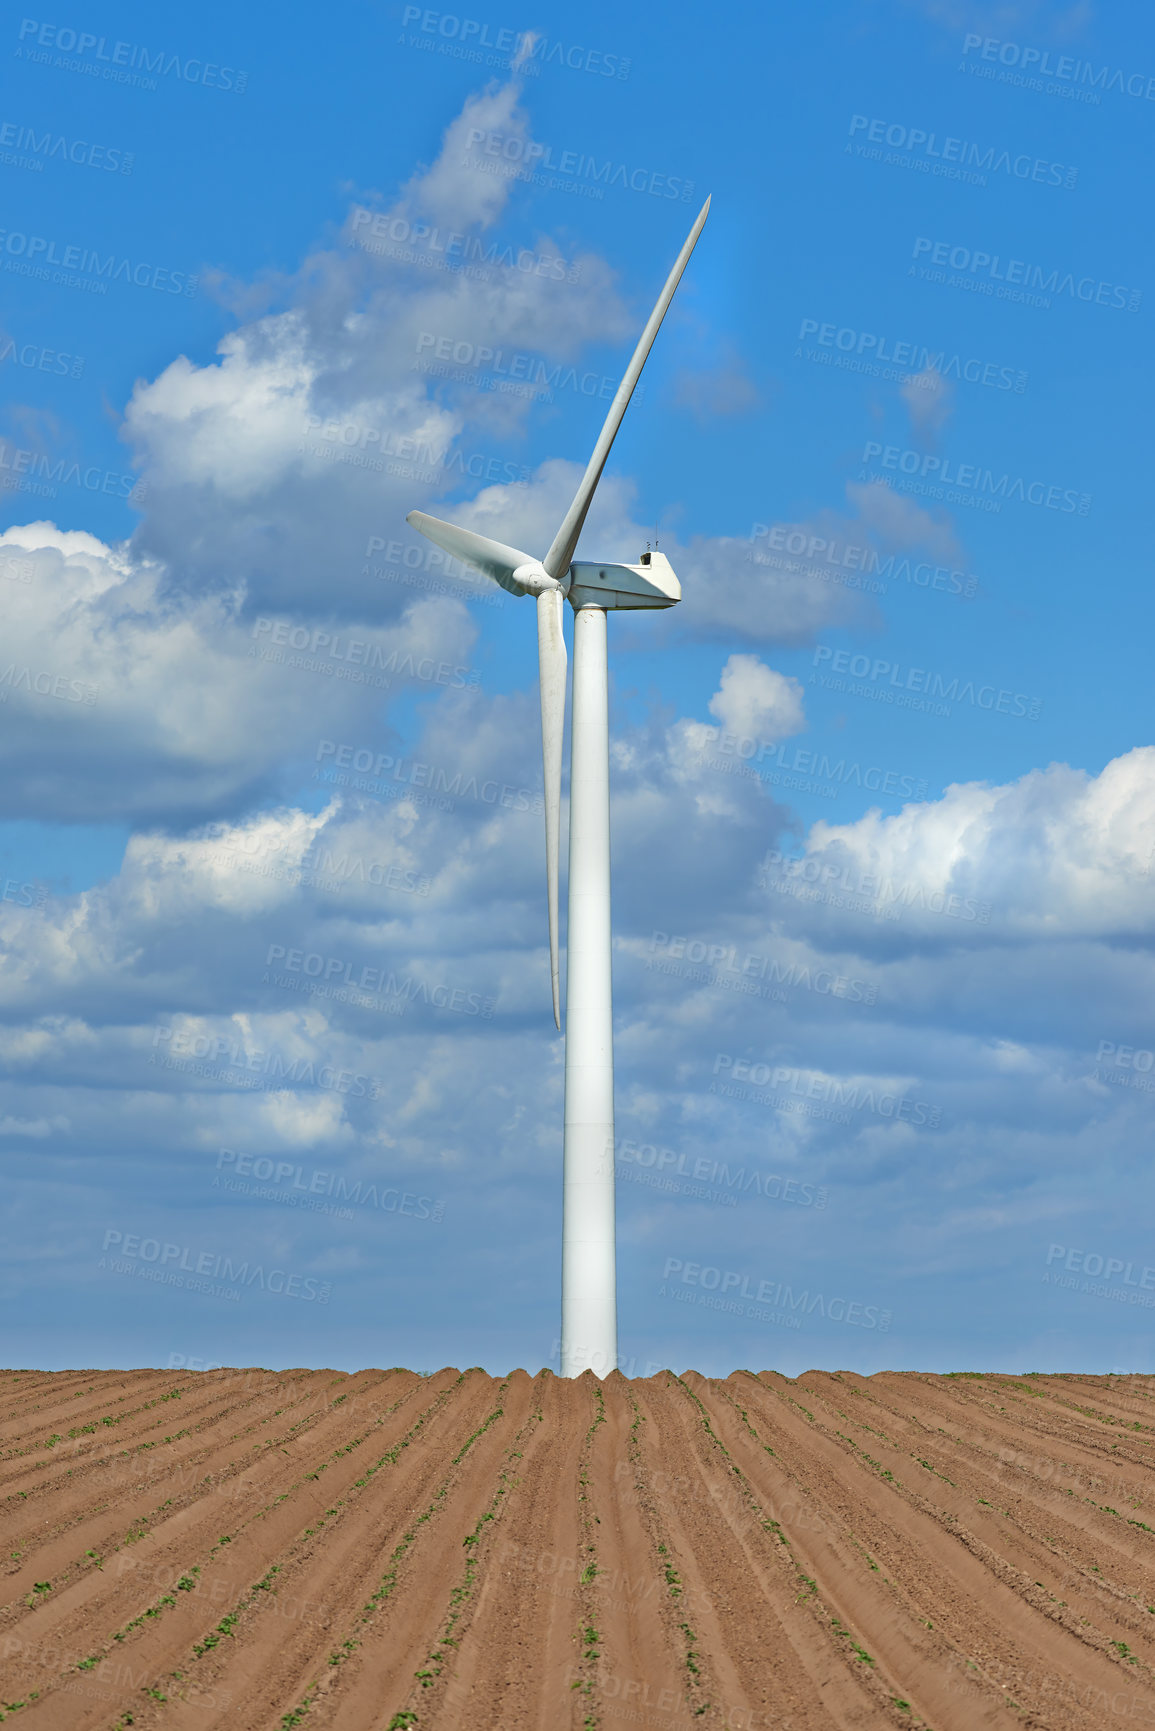 Buy stock photo Wind turbines on a farm with newly planted crops. Cloudy day on agricultural land where wind energy is the main resource. Producing sustainable electricity and fresh produce